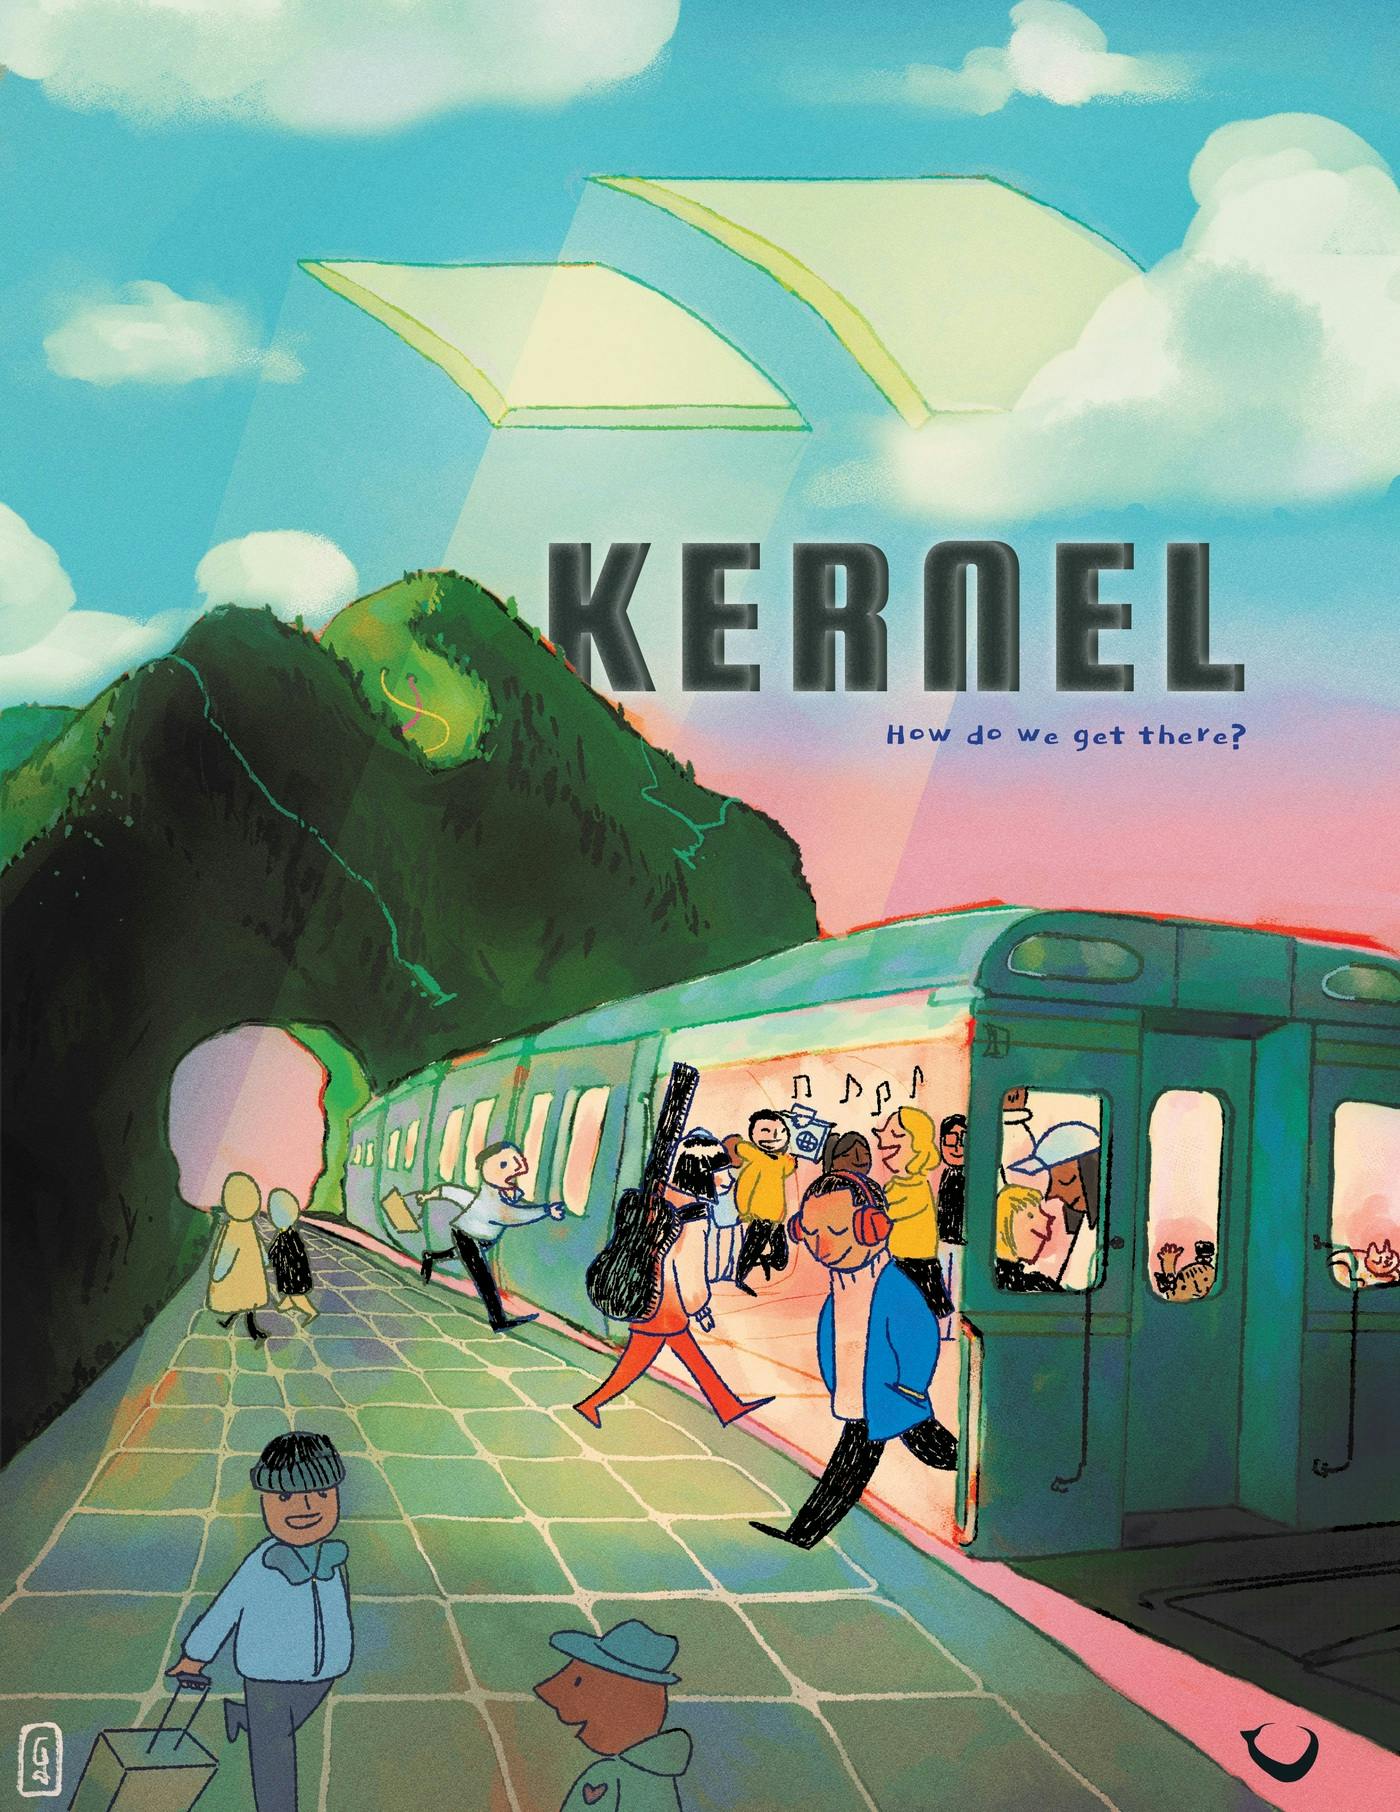 Cover image art for issue 4 of Kernel Magazine. On a blue and orange background, various cultural representations of luck (such as playing cards, a cat, fortunetelling hands, dice) cascade in a diagonal.